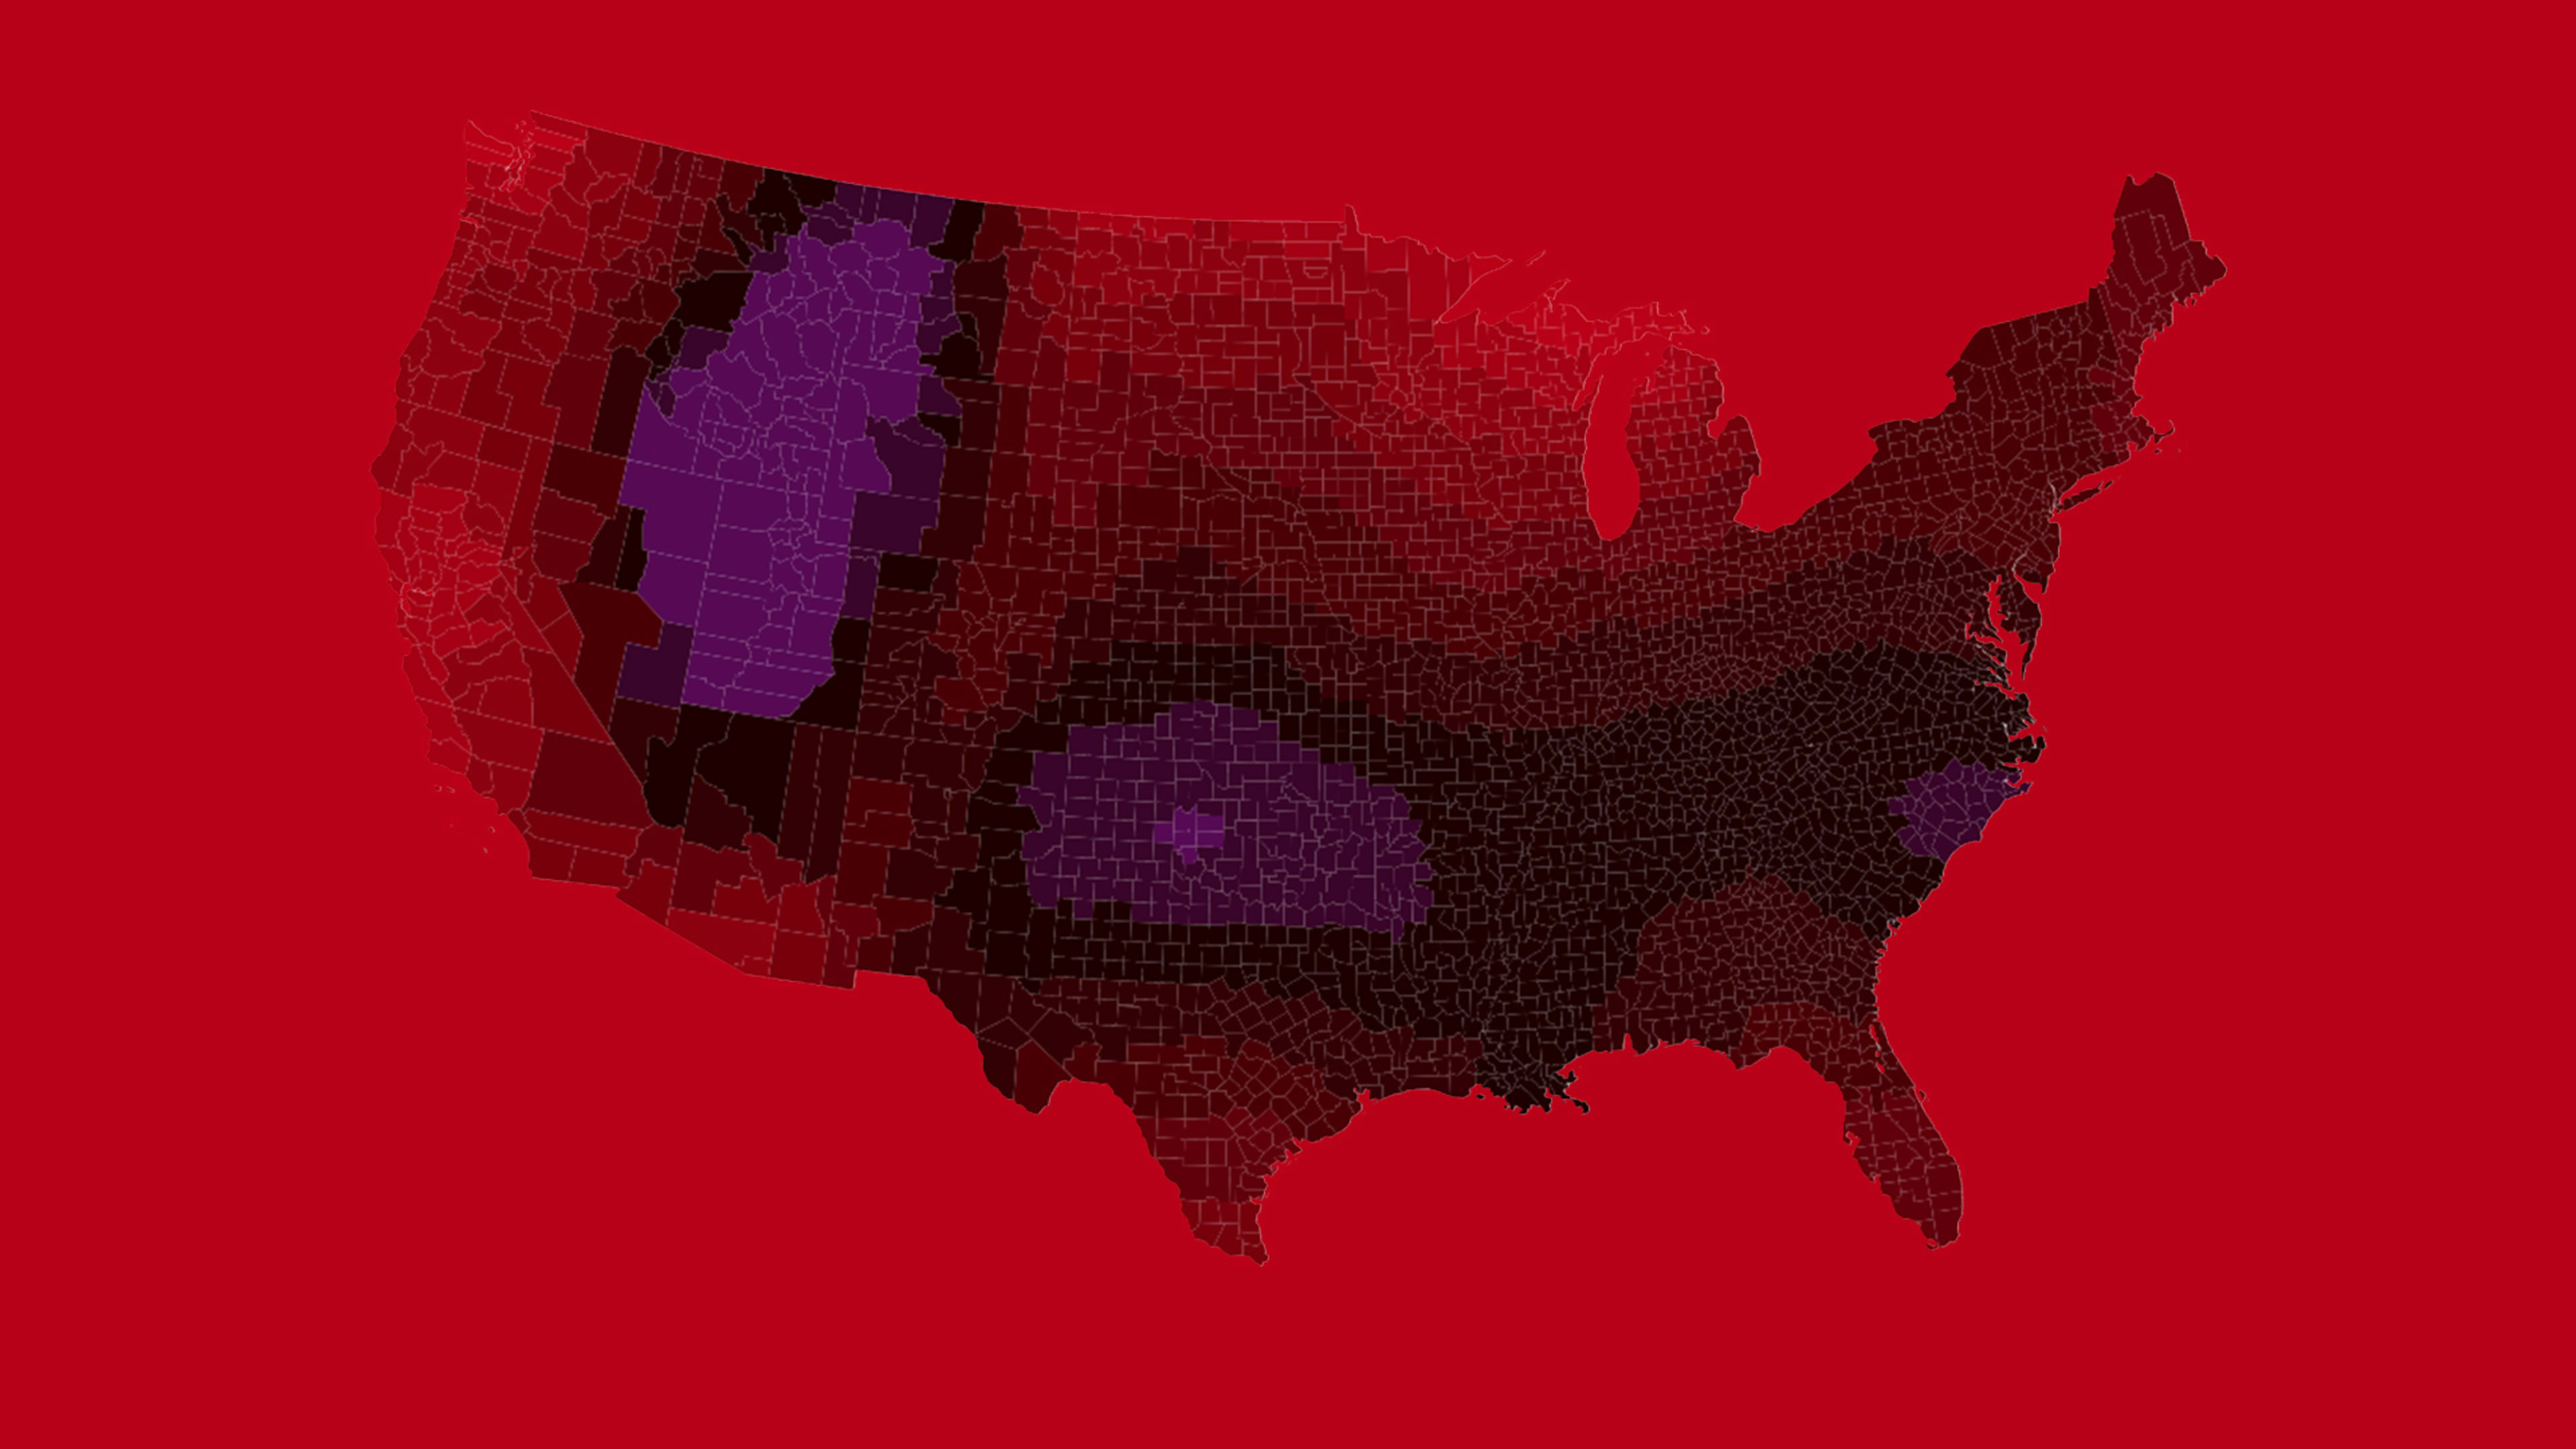 Watch the flu spread across the U.S. in real time